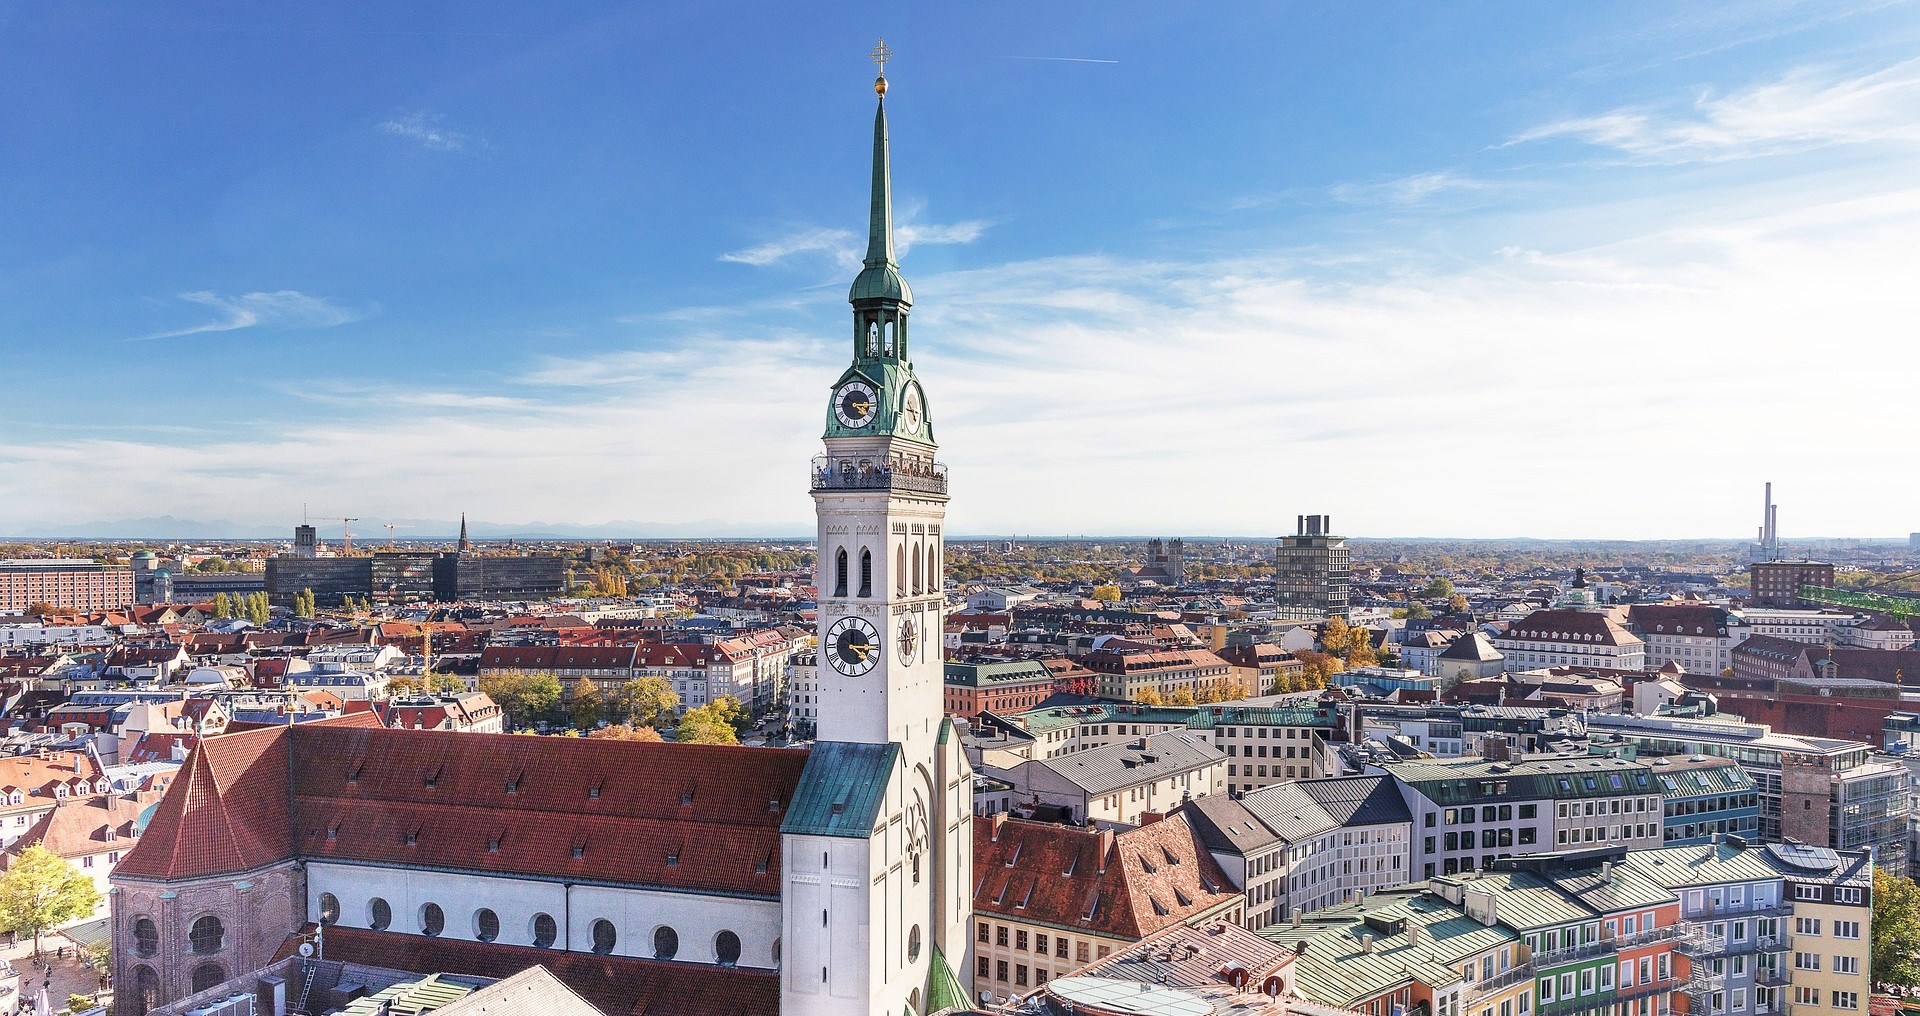 The Ultimate Free Walking Tour of Munich (For 2022)